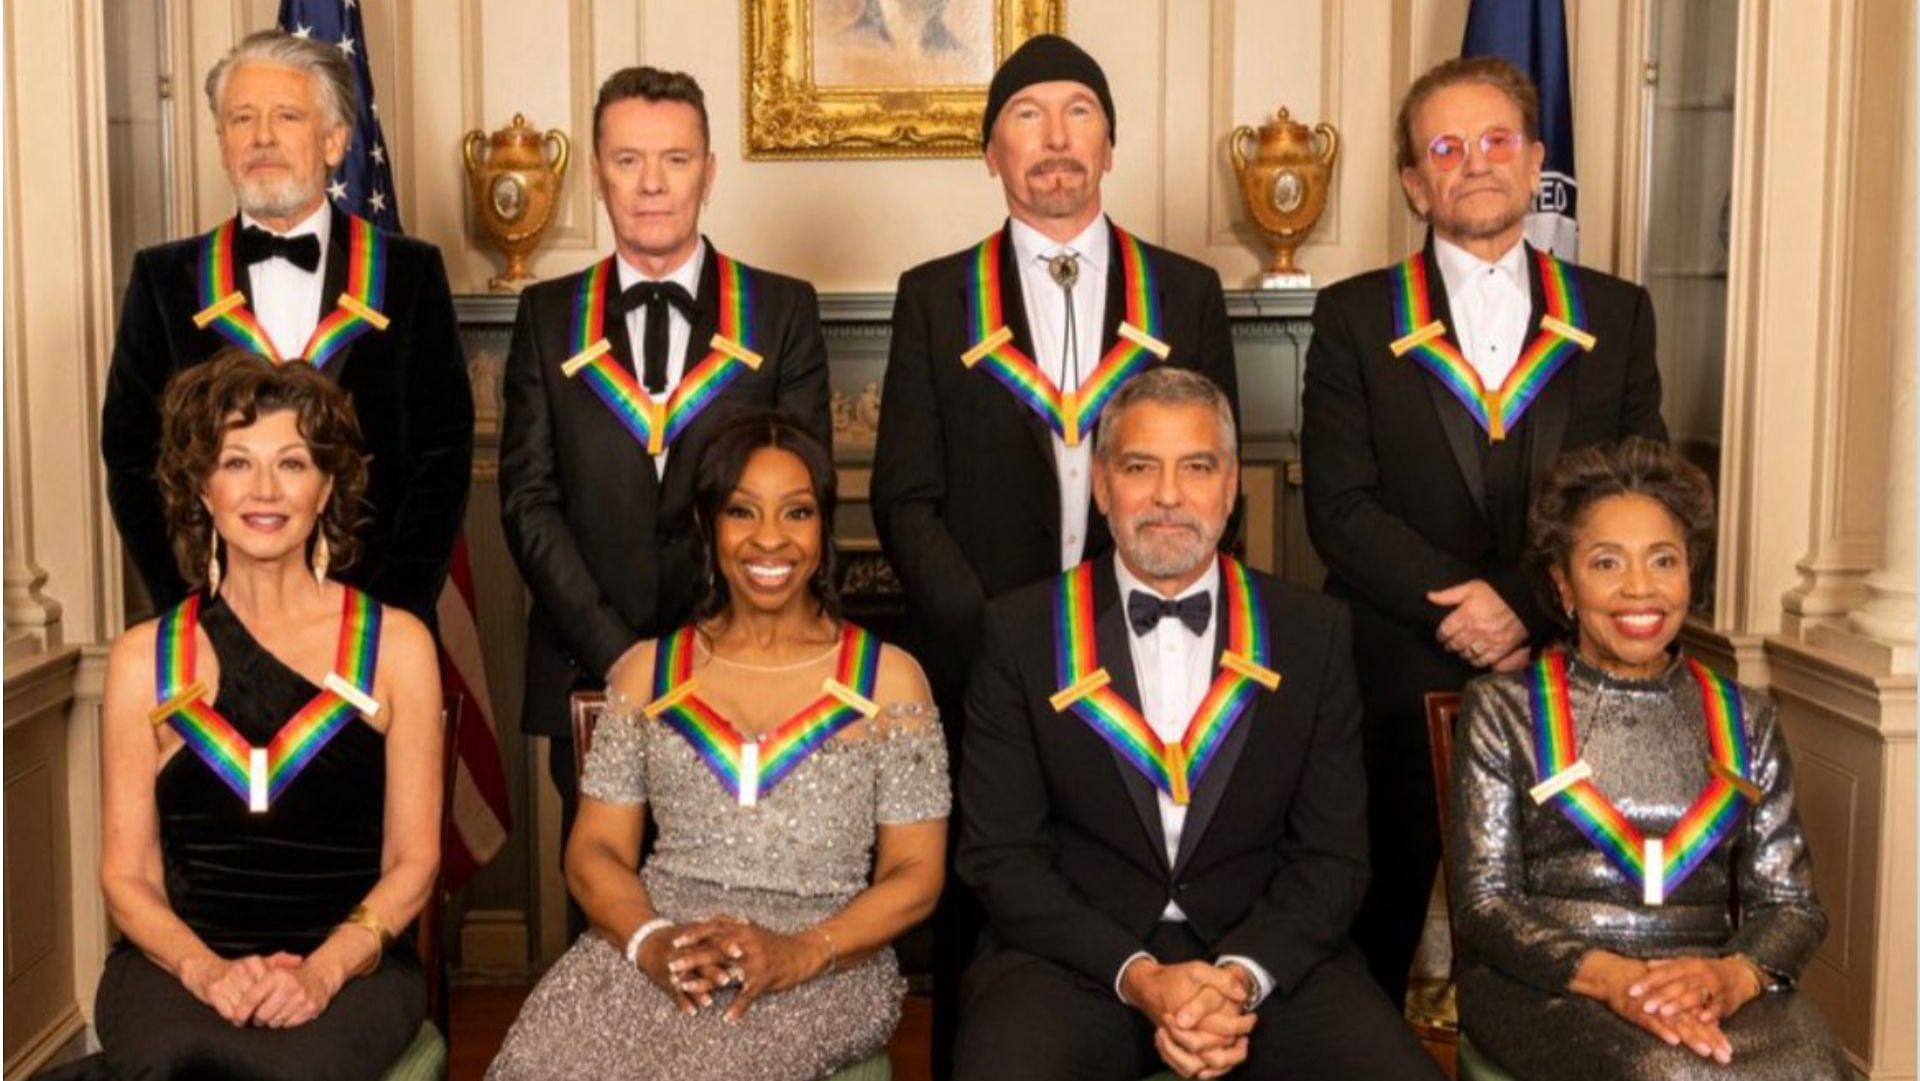 Kennedy Center saw several honorees this year. (Image via @sass3366/Twitter)